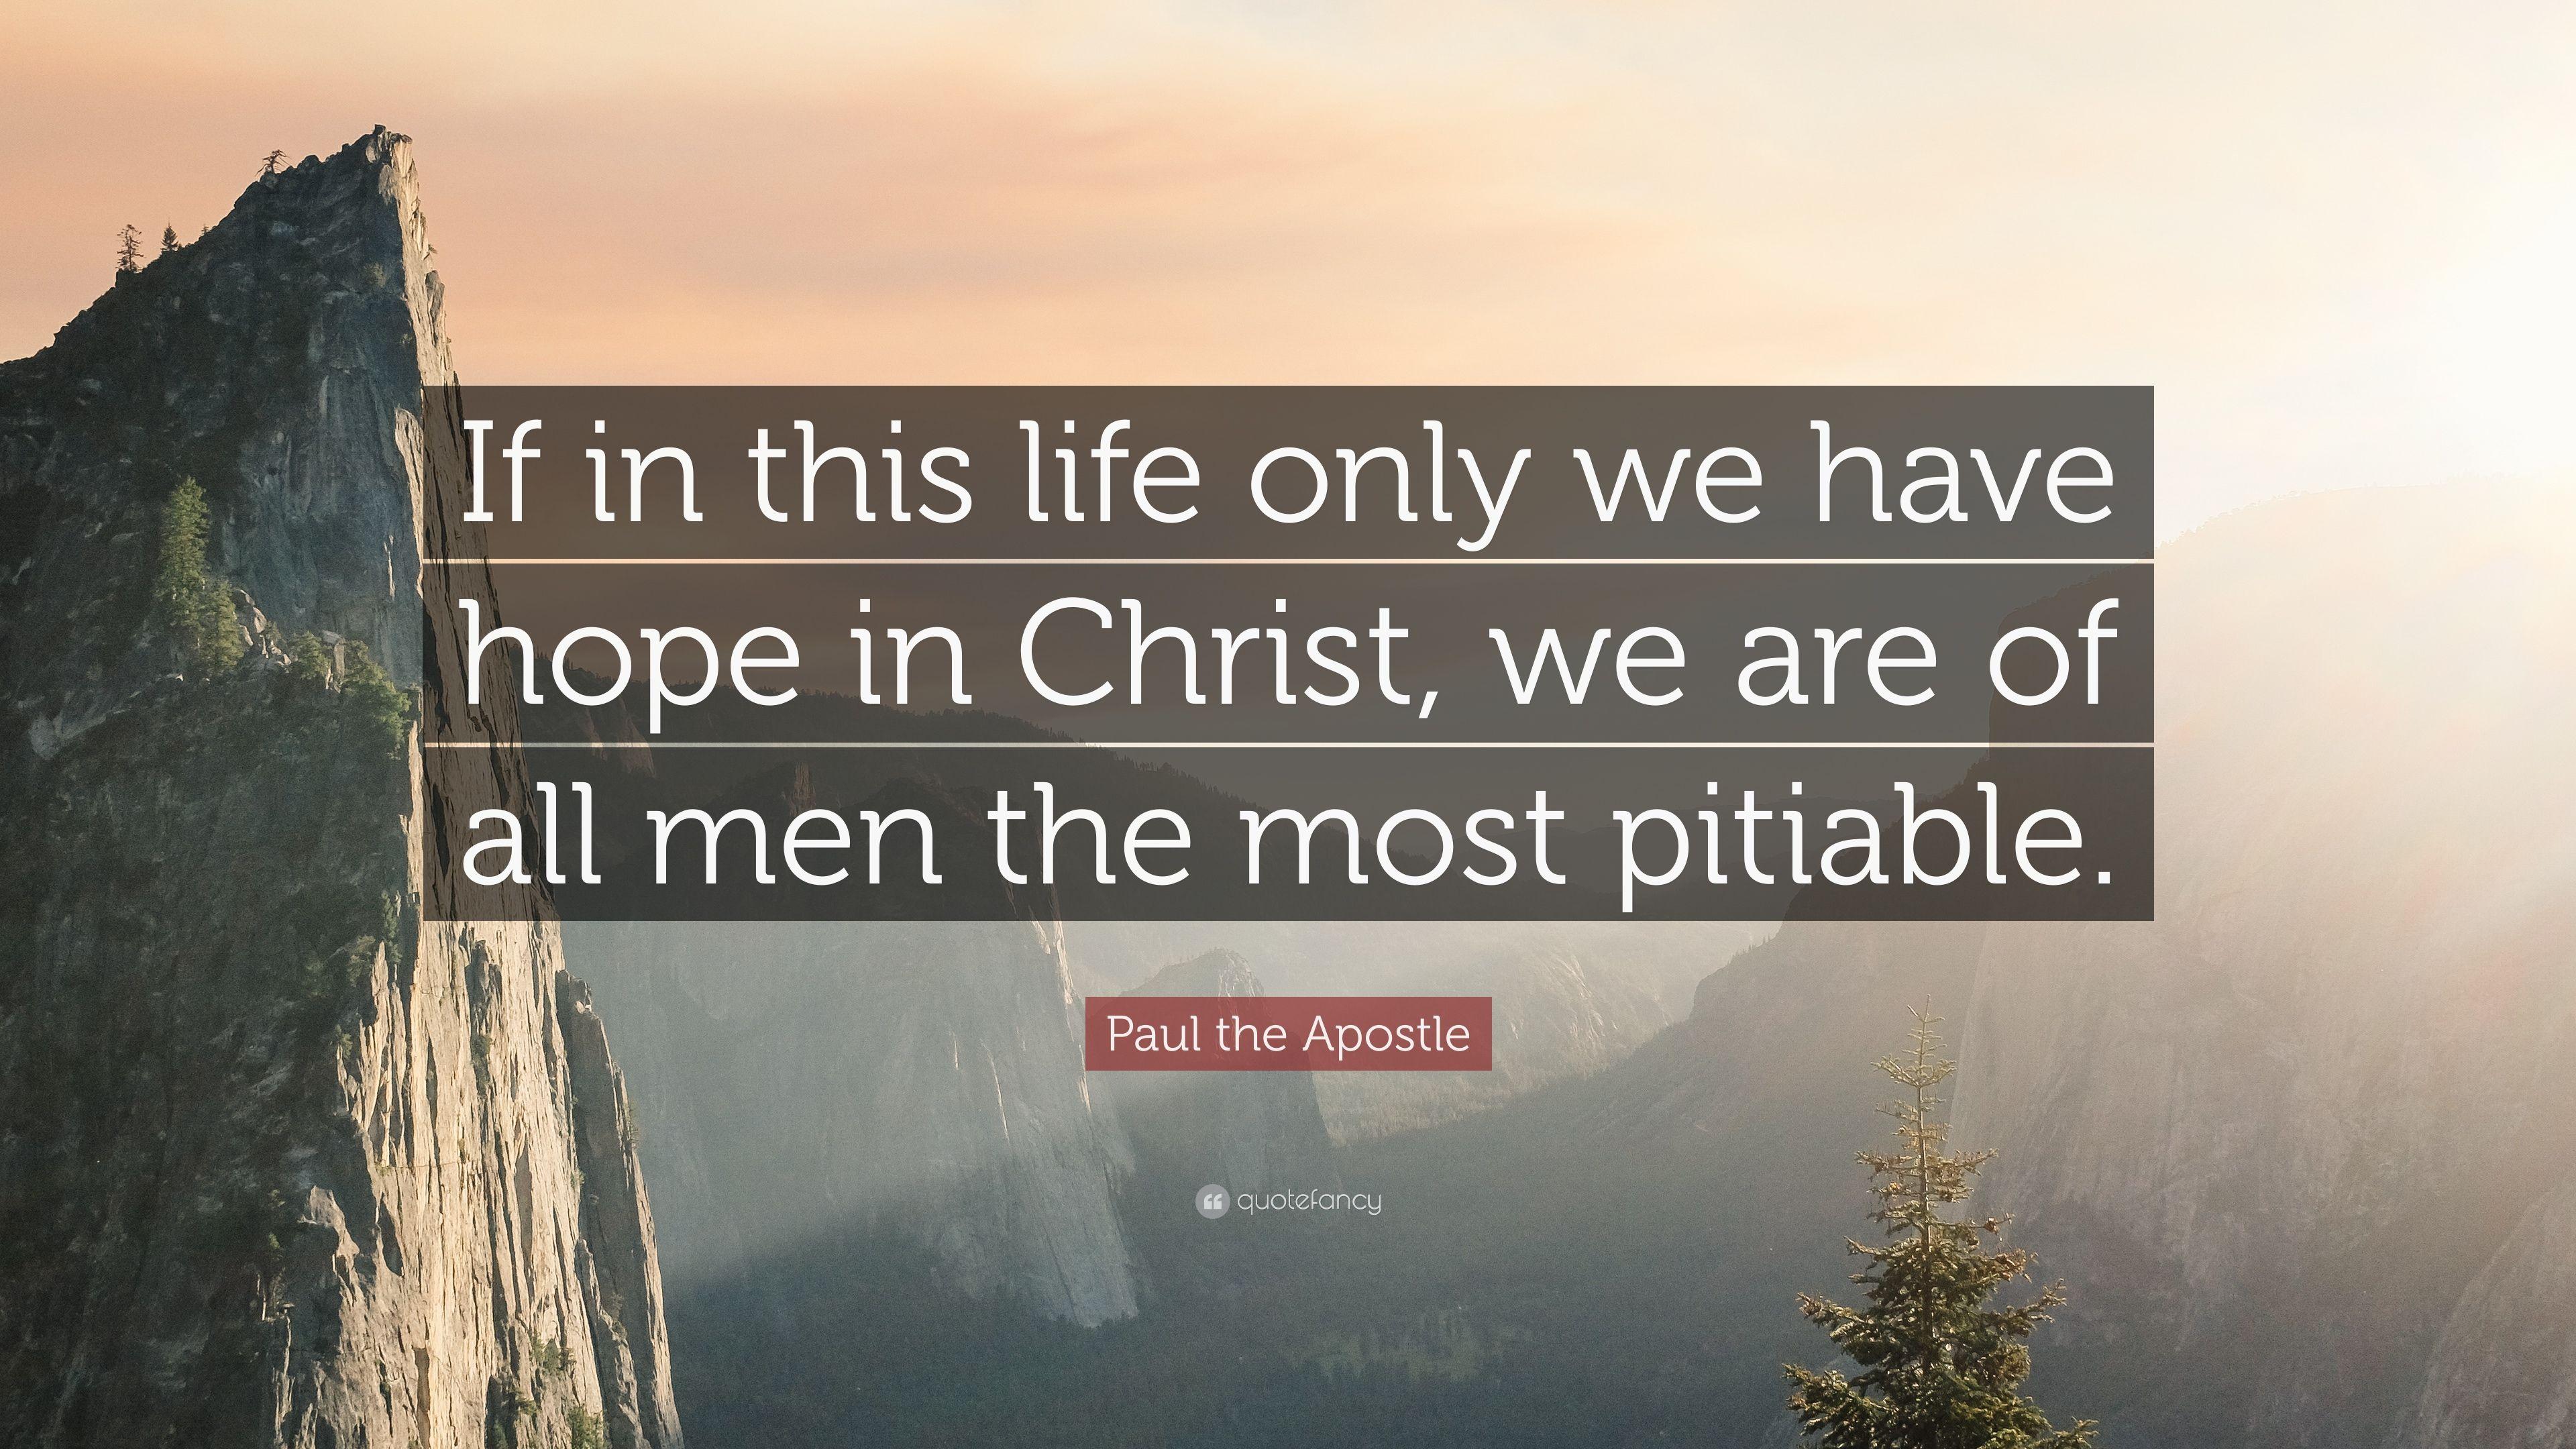 Paul the Apostle Quote: “If in this life only we have hope